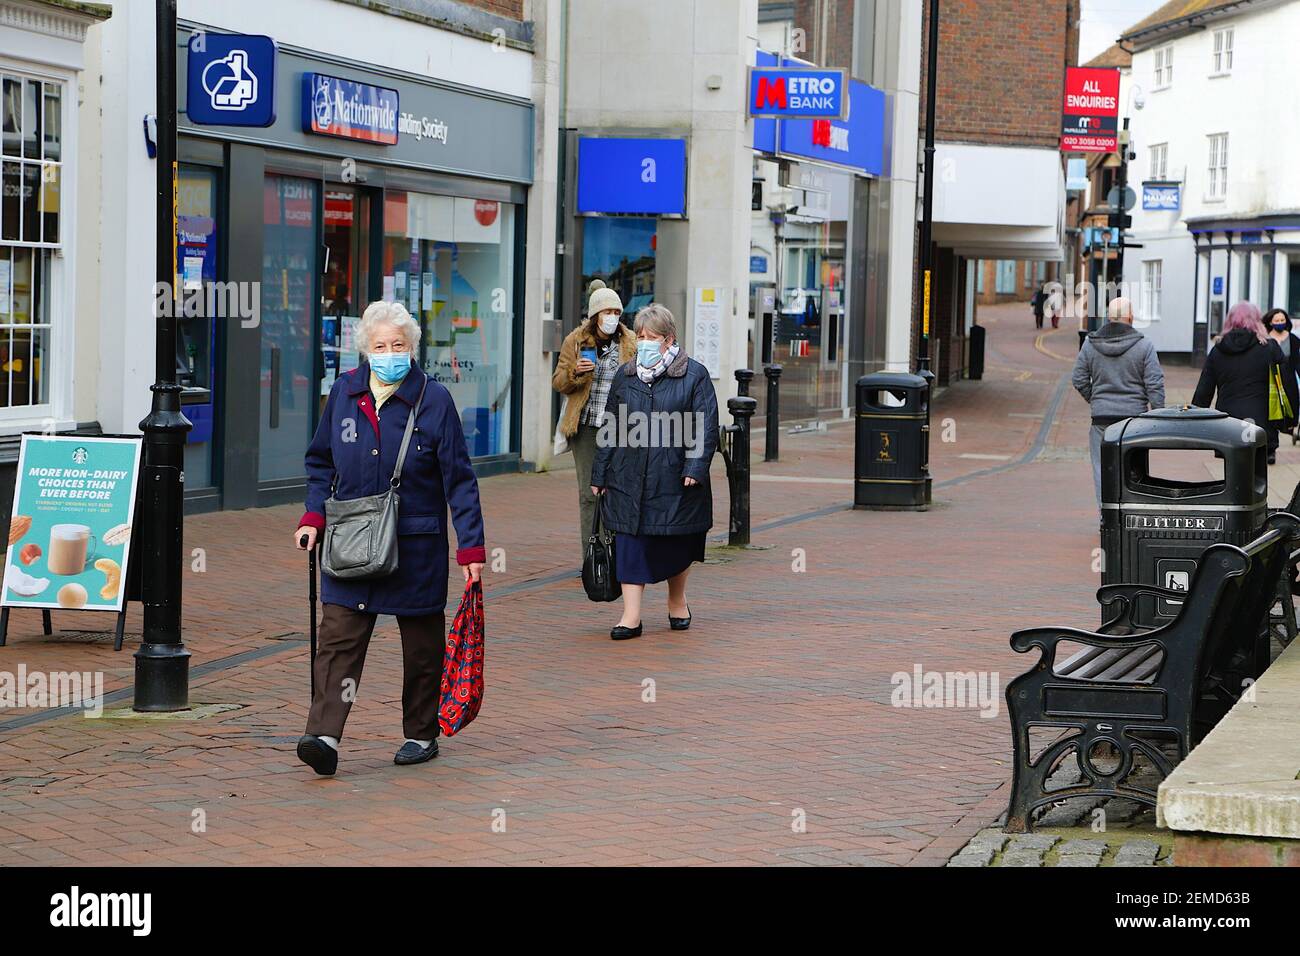 Ashford, Kent, UK. 25 February, 2021. Weekly cases of the coronavirus have come down considerably in Ashford with 71.5 cases per 100,000 population. People wearing face masks during lockdown 3 in the town centre high street. Photo Credit: Paul Lawrenson/Alamy Live News Stock Photo